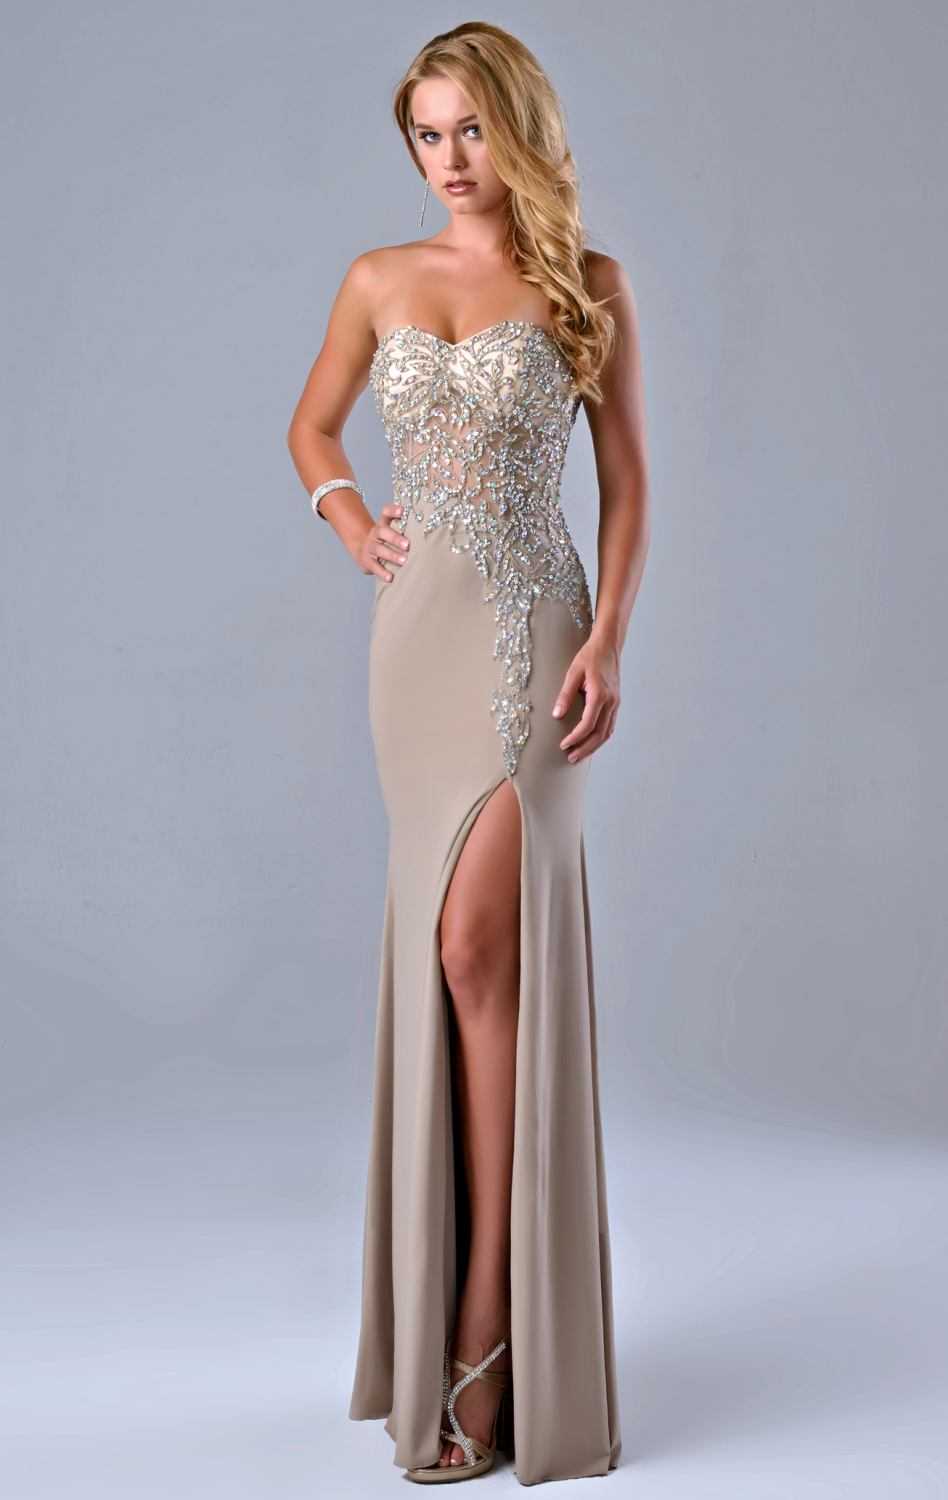 20 Elegant and Glamorous Evening Gowns